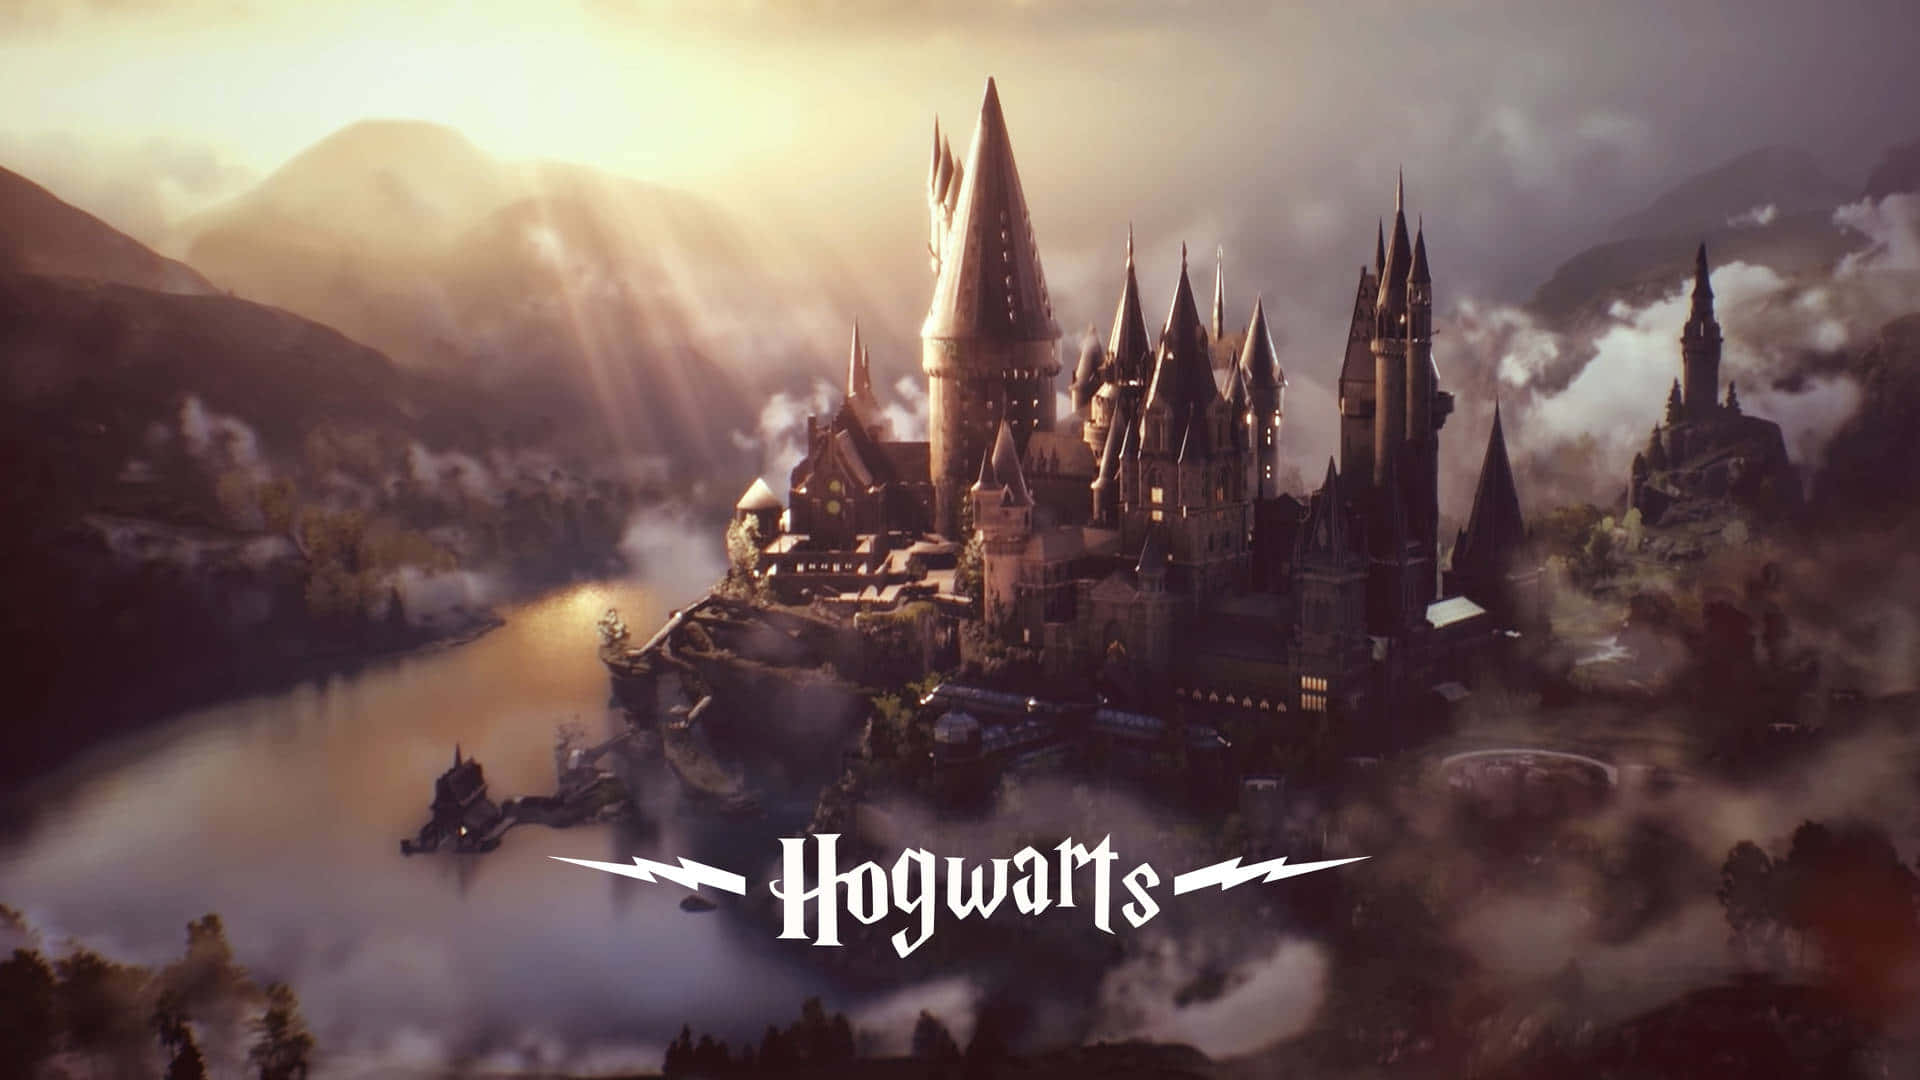 100+] Harry Potter Hogwarts Iphone Wallpapers